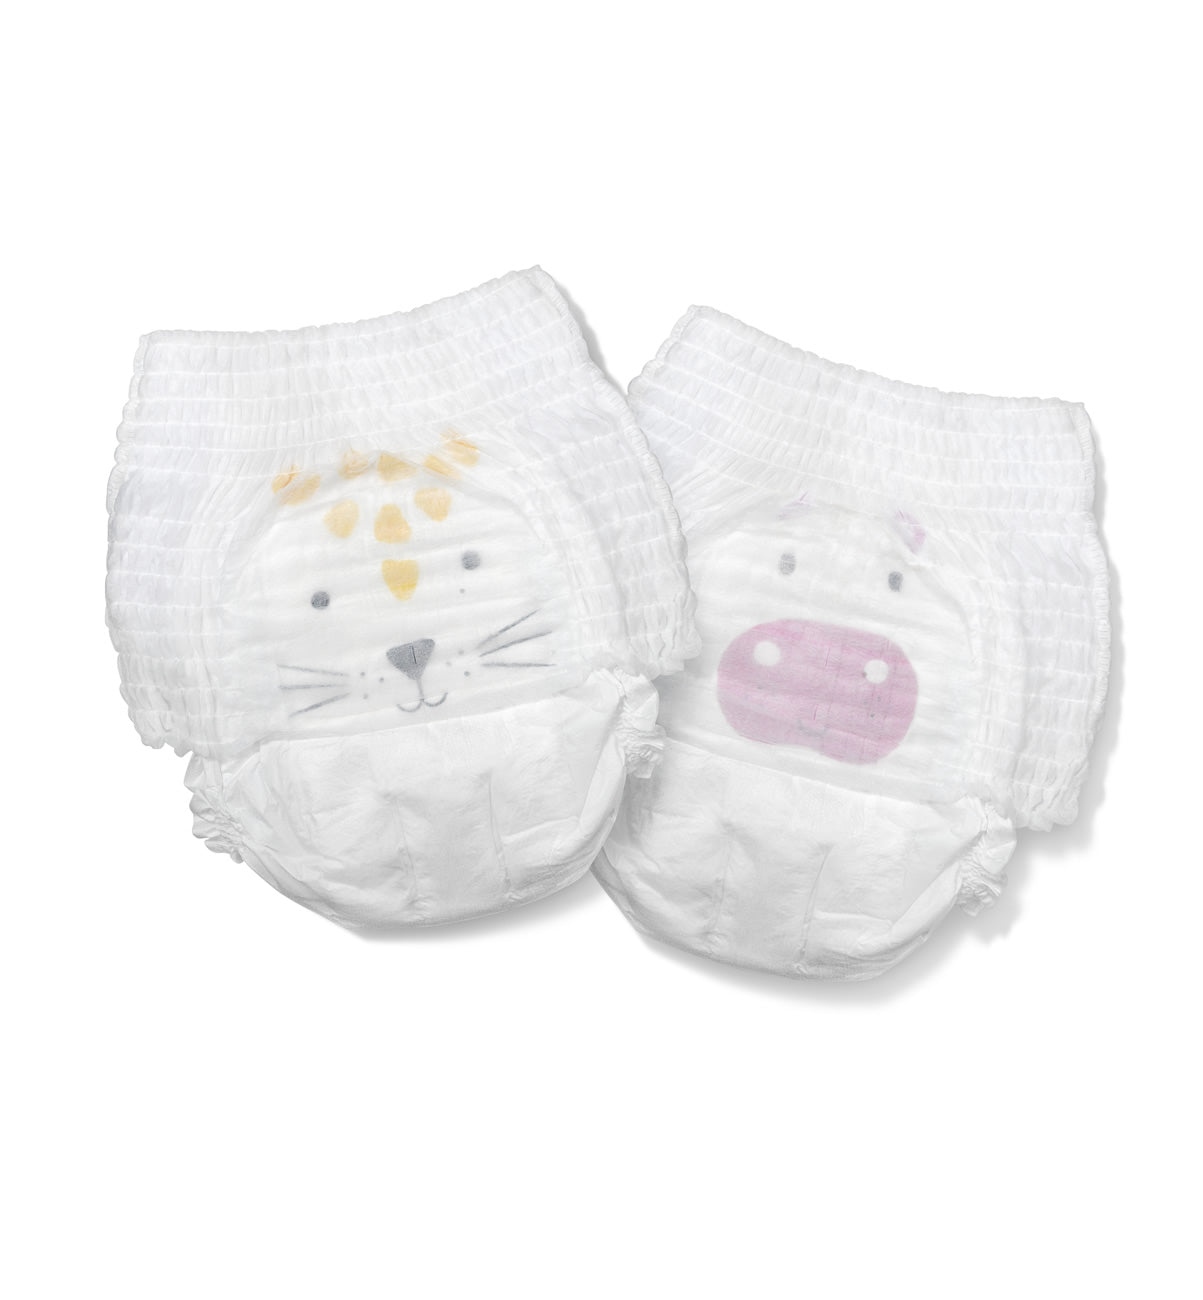 pampers active baby 4+ 45 szt